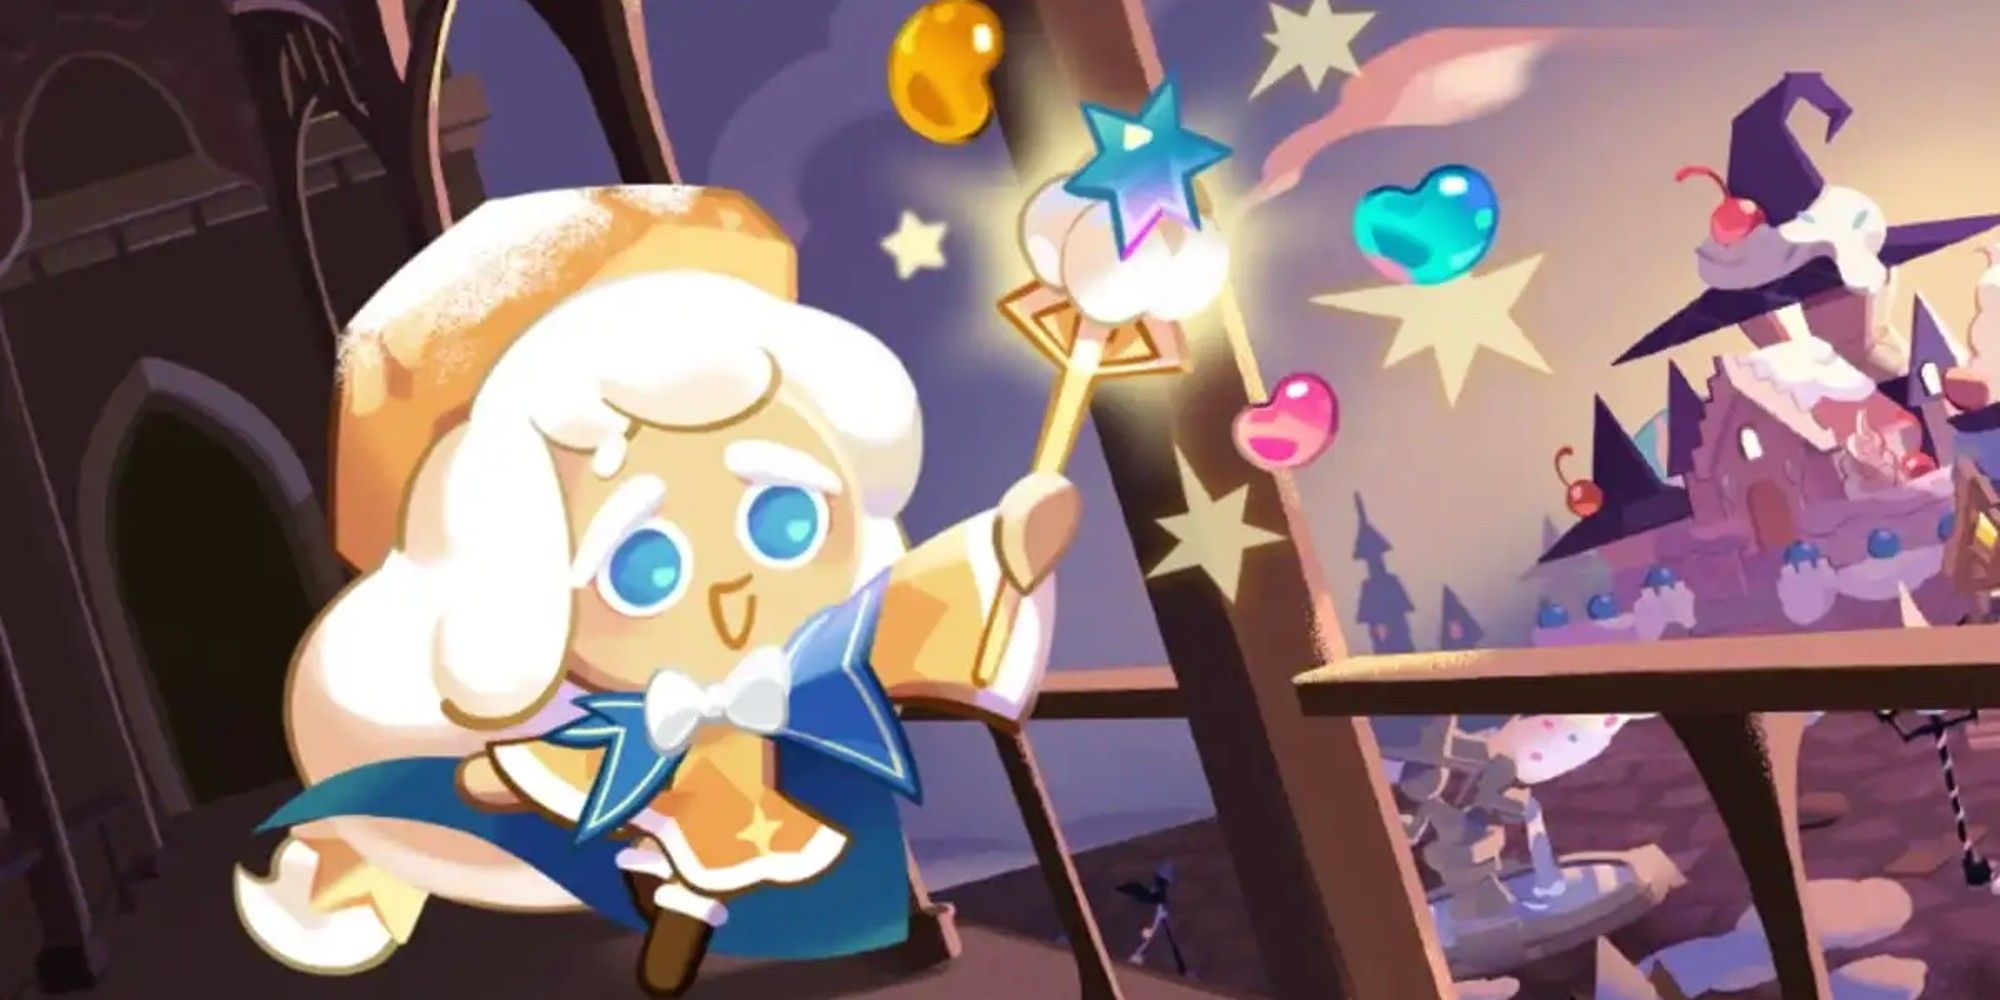 Cream Puff Cookie casts her magic off a high balcony